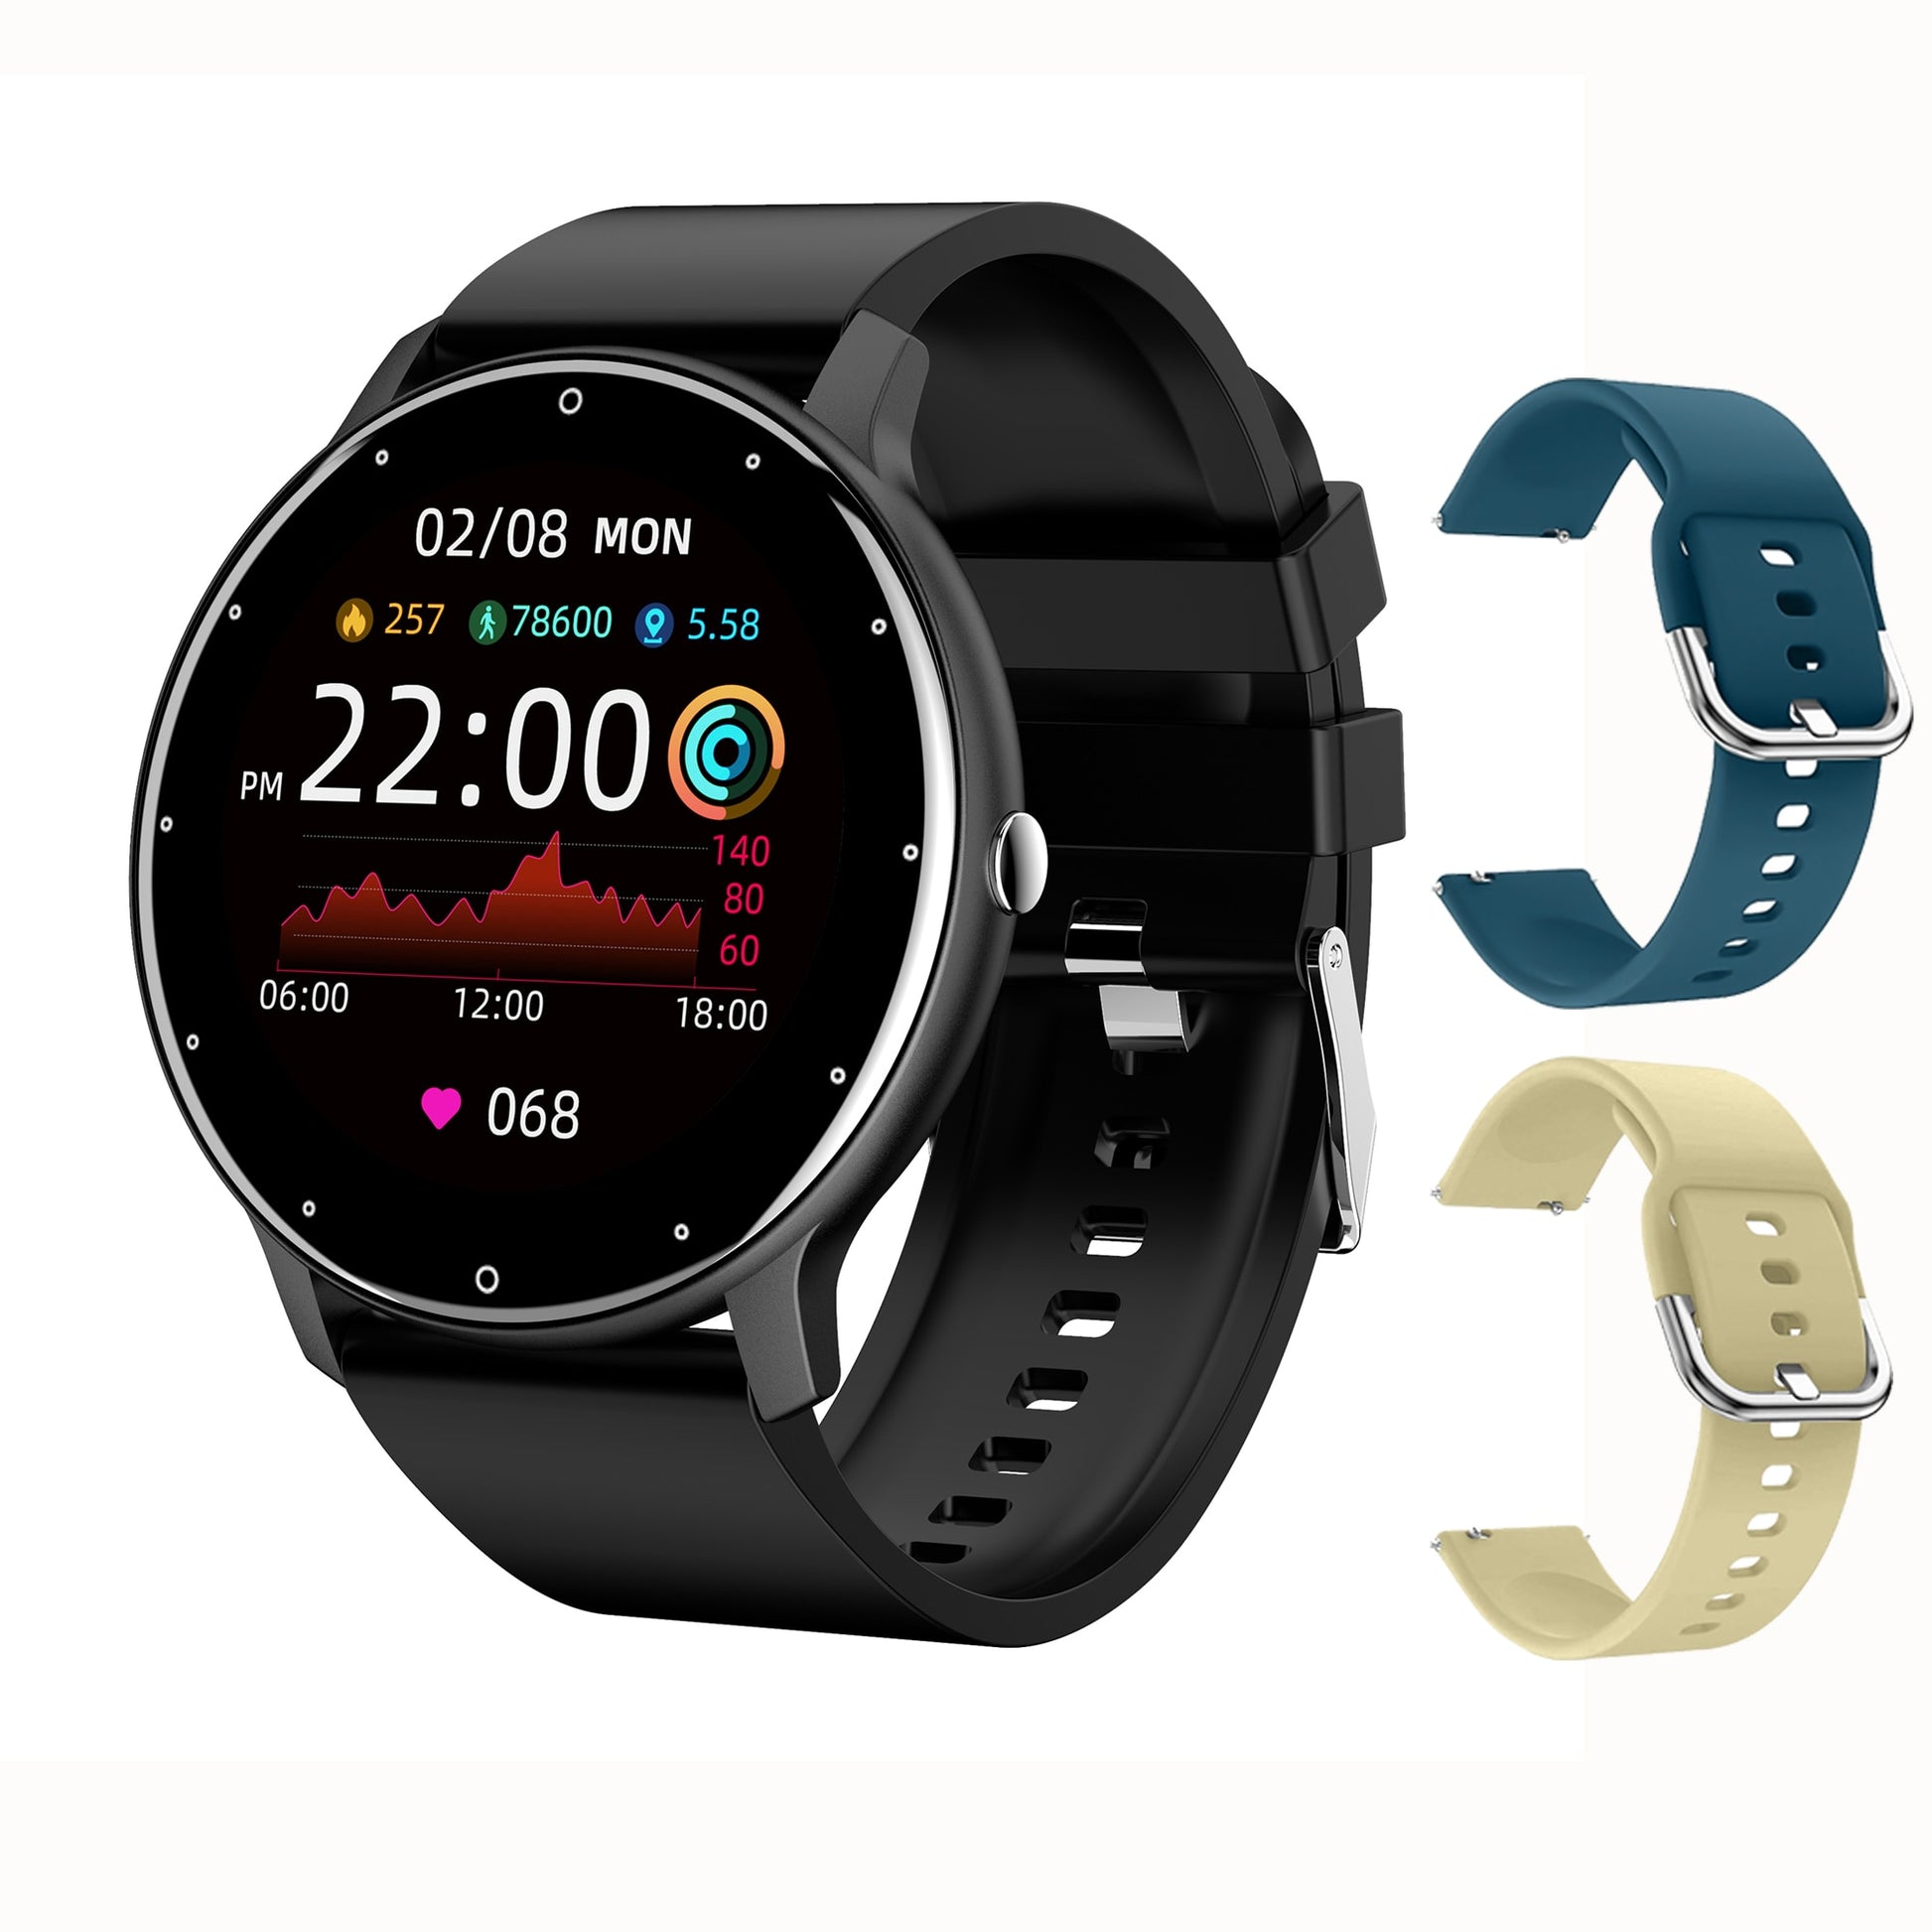 New Lady Sport Fitness Smartwatch Sleep Heart Rate Monitor Waterproof Watches For IOS & Android - onestopmegamall23